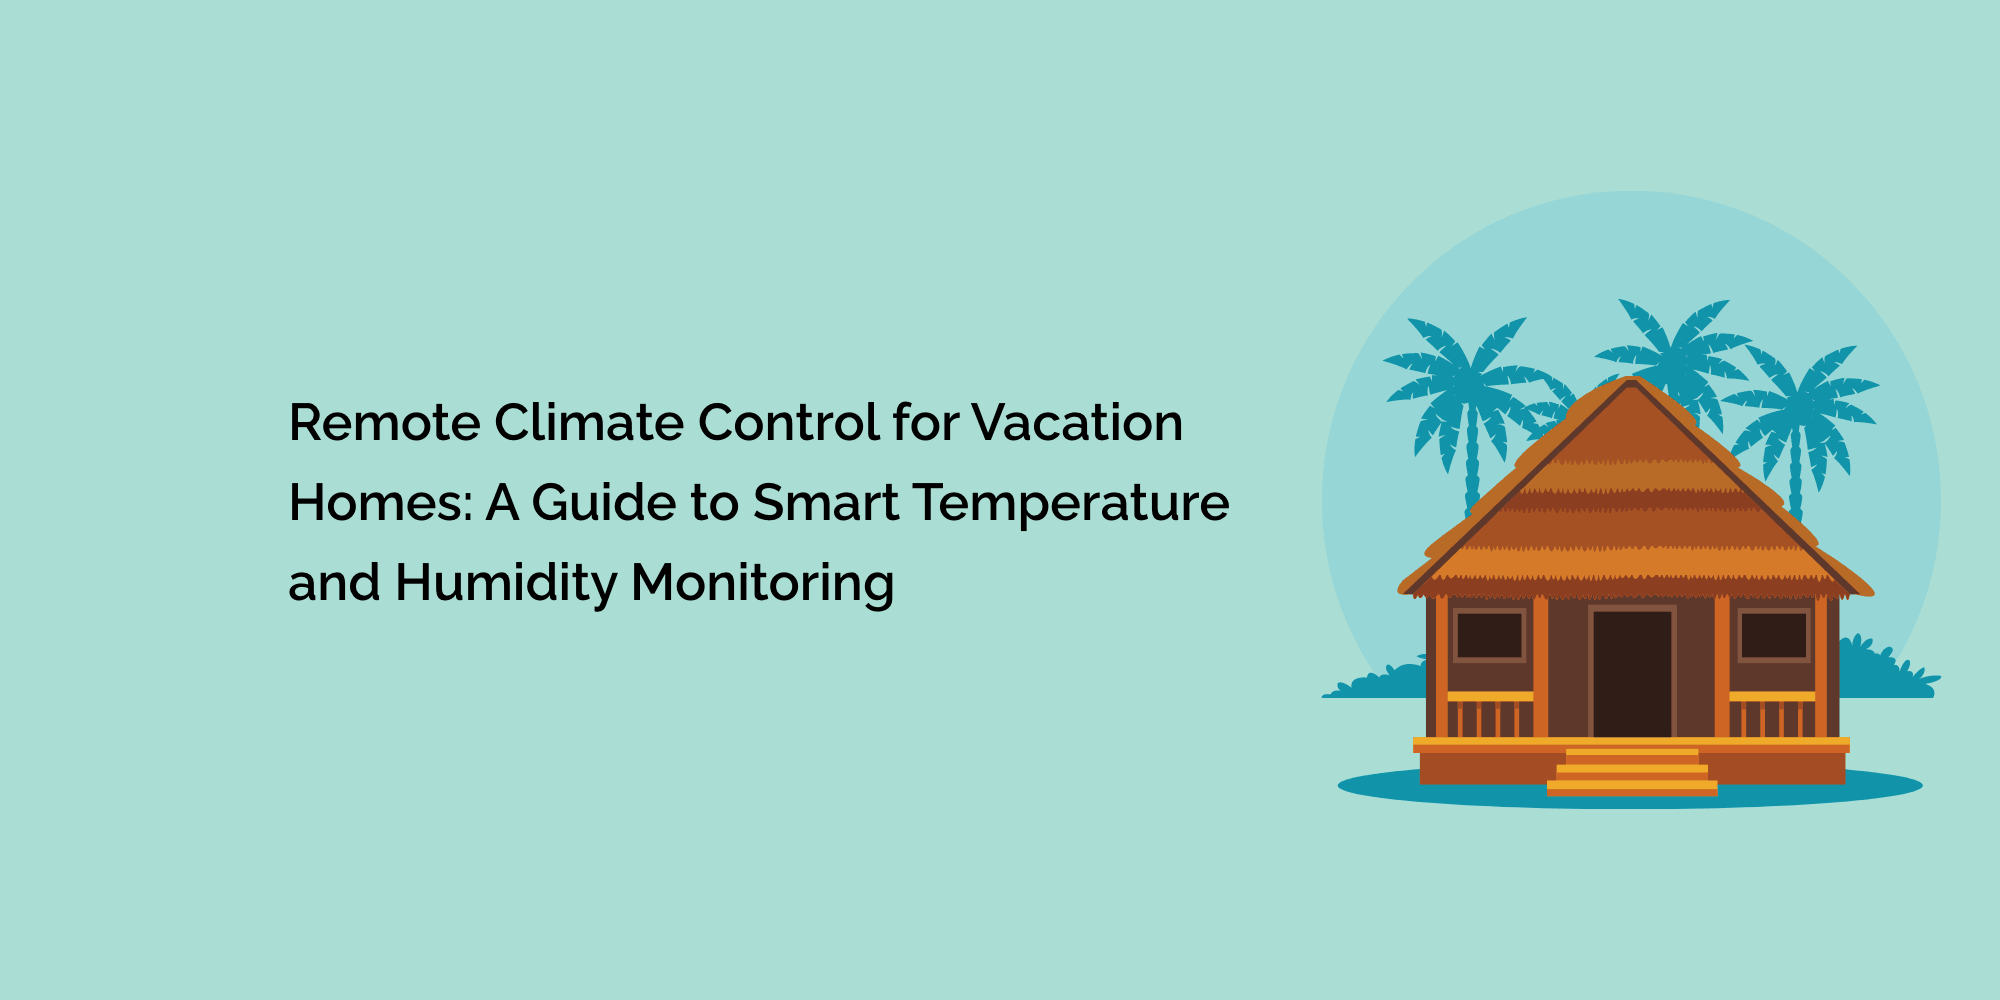 Remote Climate Control for Vacation Homes: A Guide to Smart Temperature and Humidity Monitoring